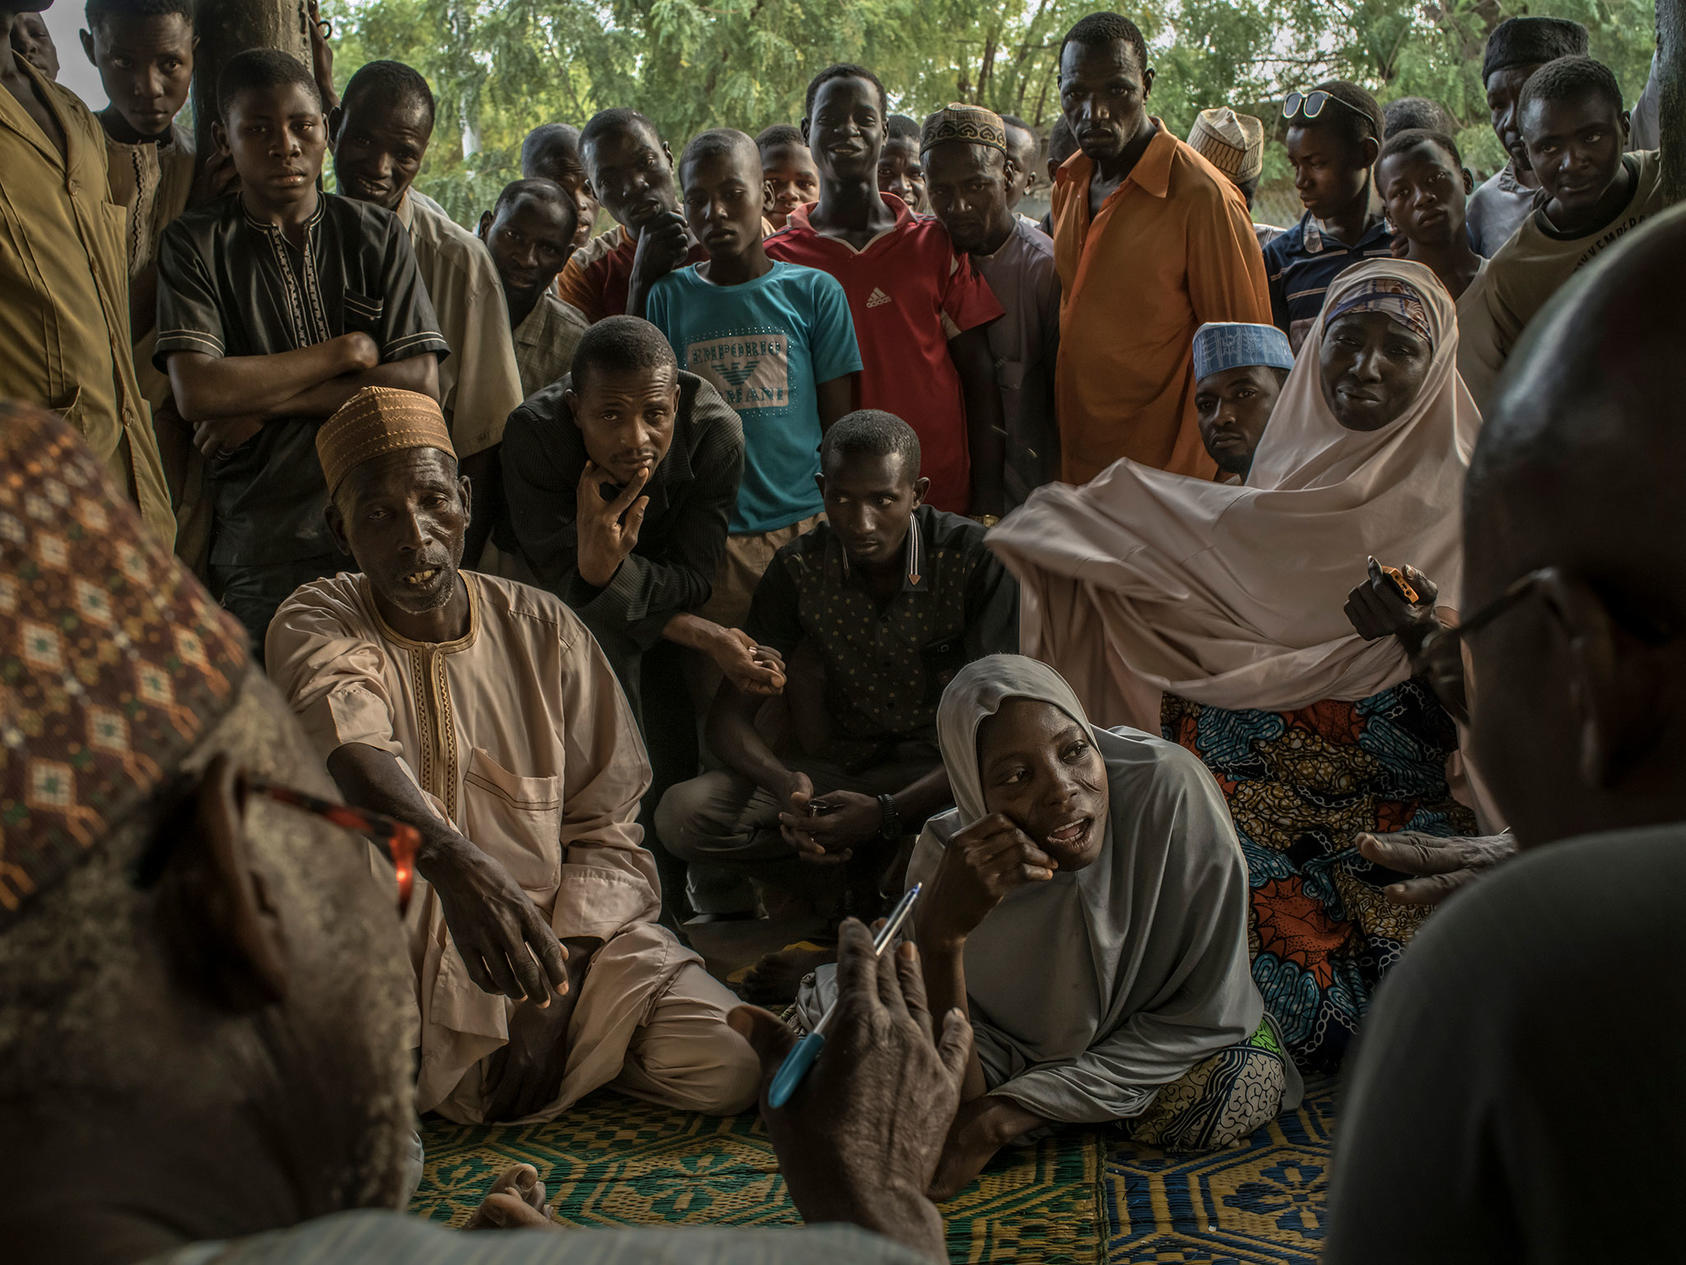 Saadia, who was six months pregnant, outlines to Judge Alkali Laouali Ismaël, left, her reasons for wanting a divorce, in Maradi, Niger, April 4, 2017.